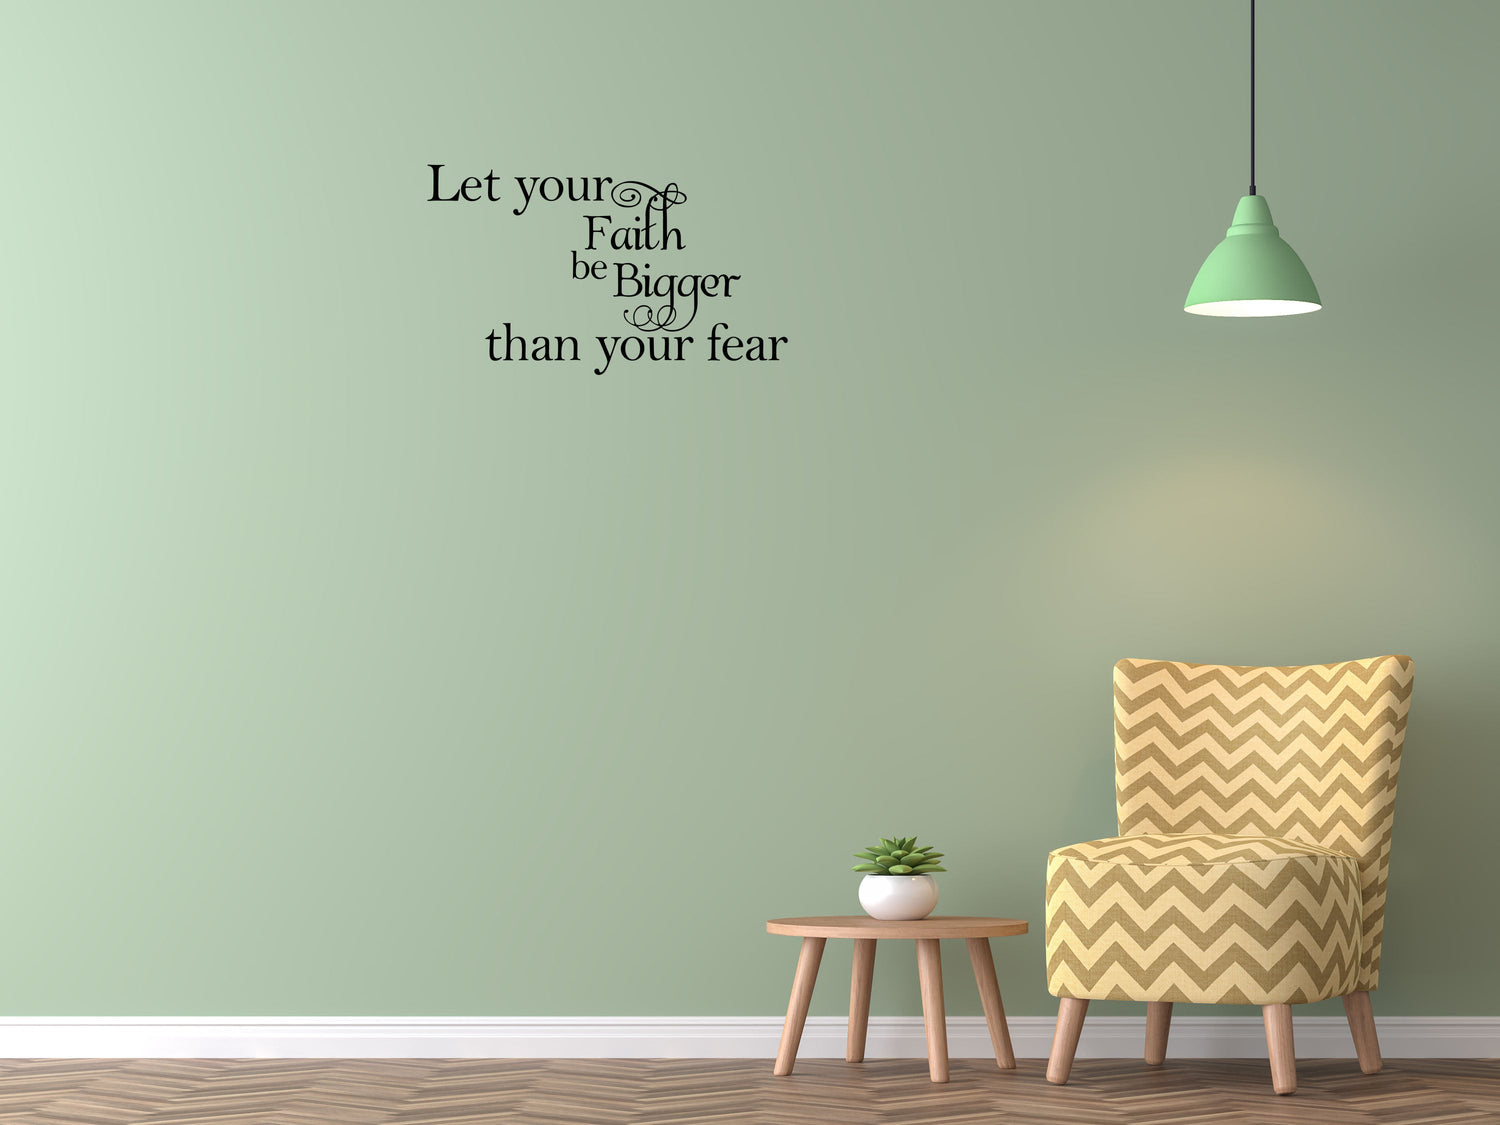 Let Your Faith Be Bigger Than Your Fear Vinyl Wall Decal Inspirational Wall Signs 